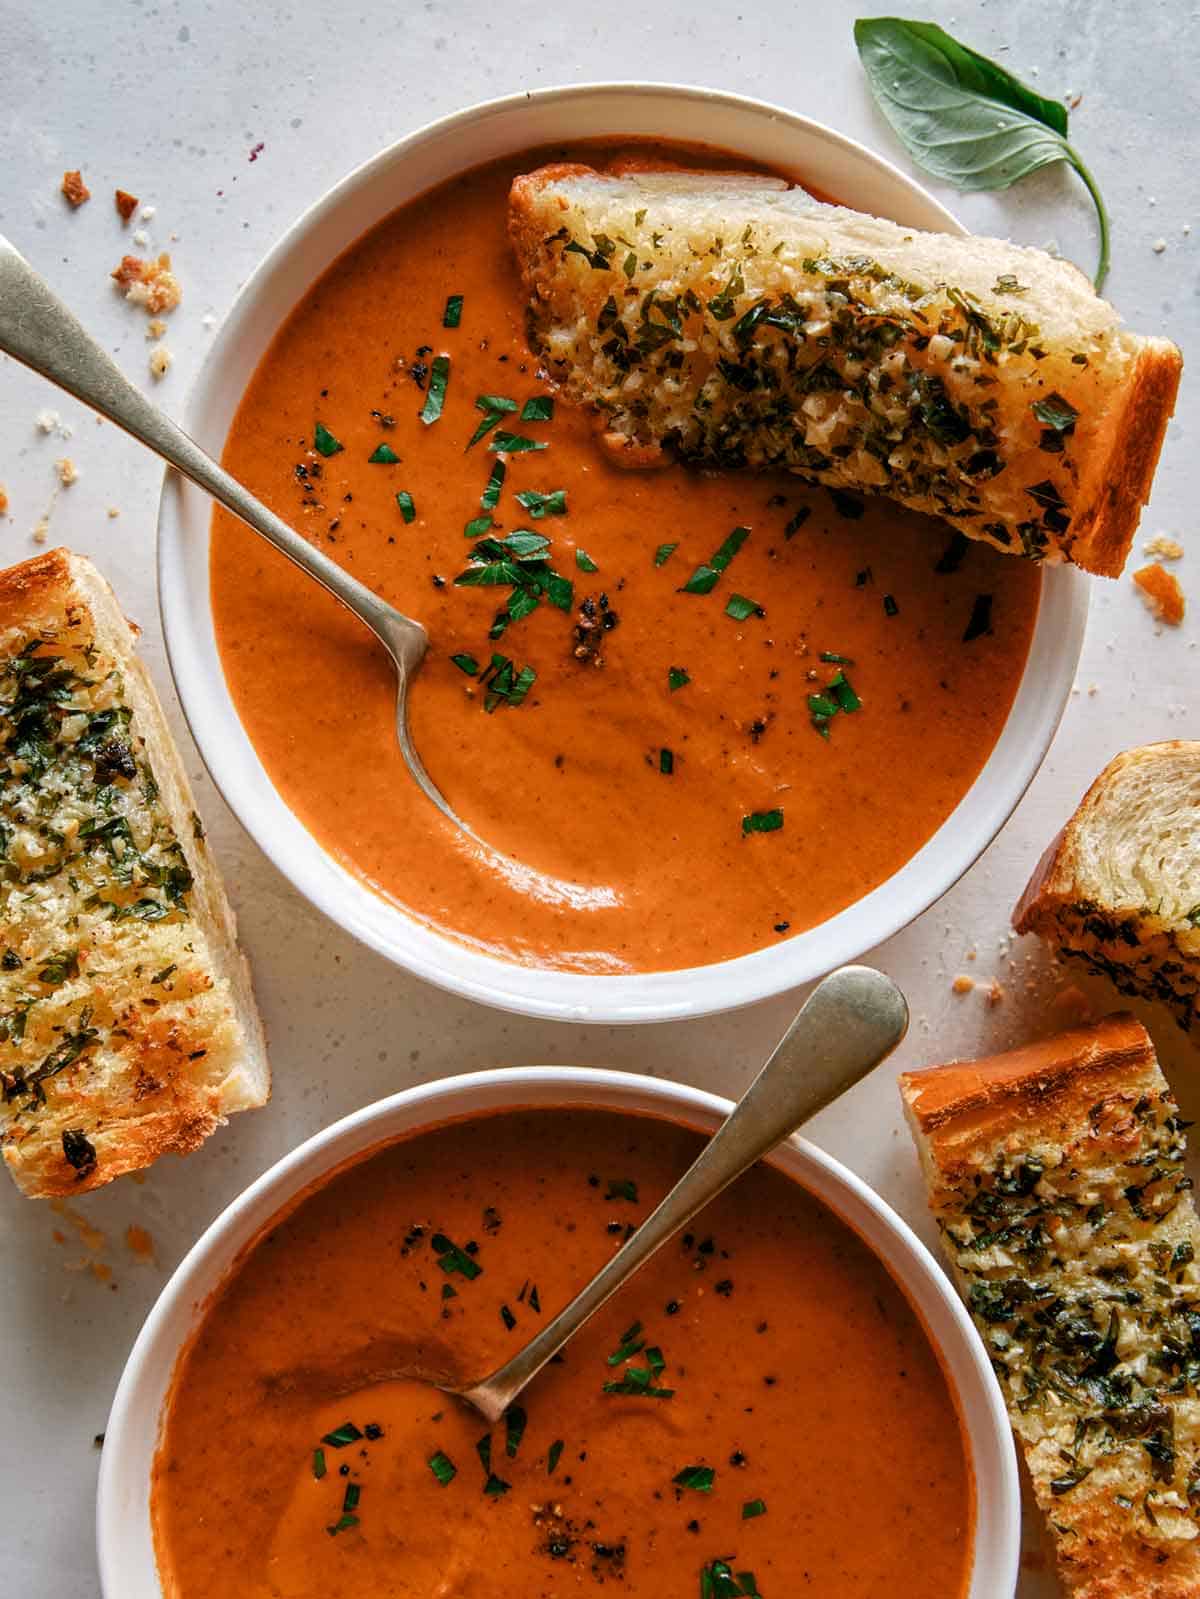 Tomato soup with bread dipped in. 